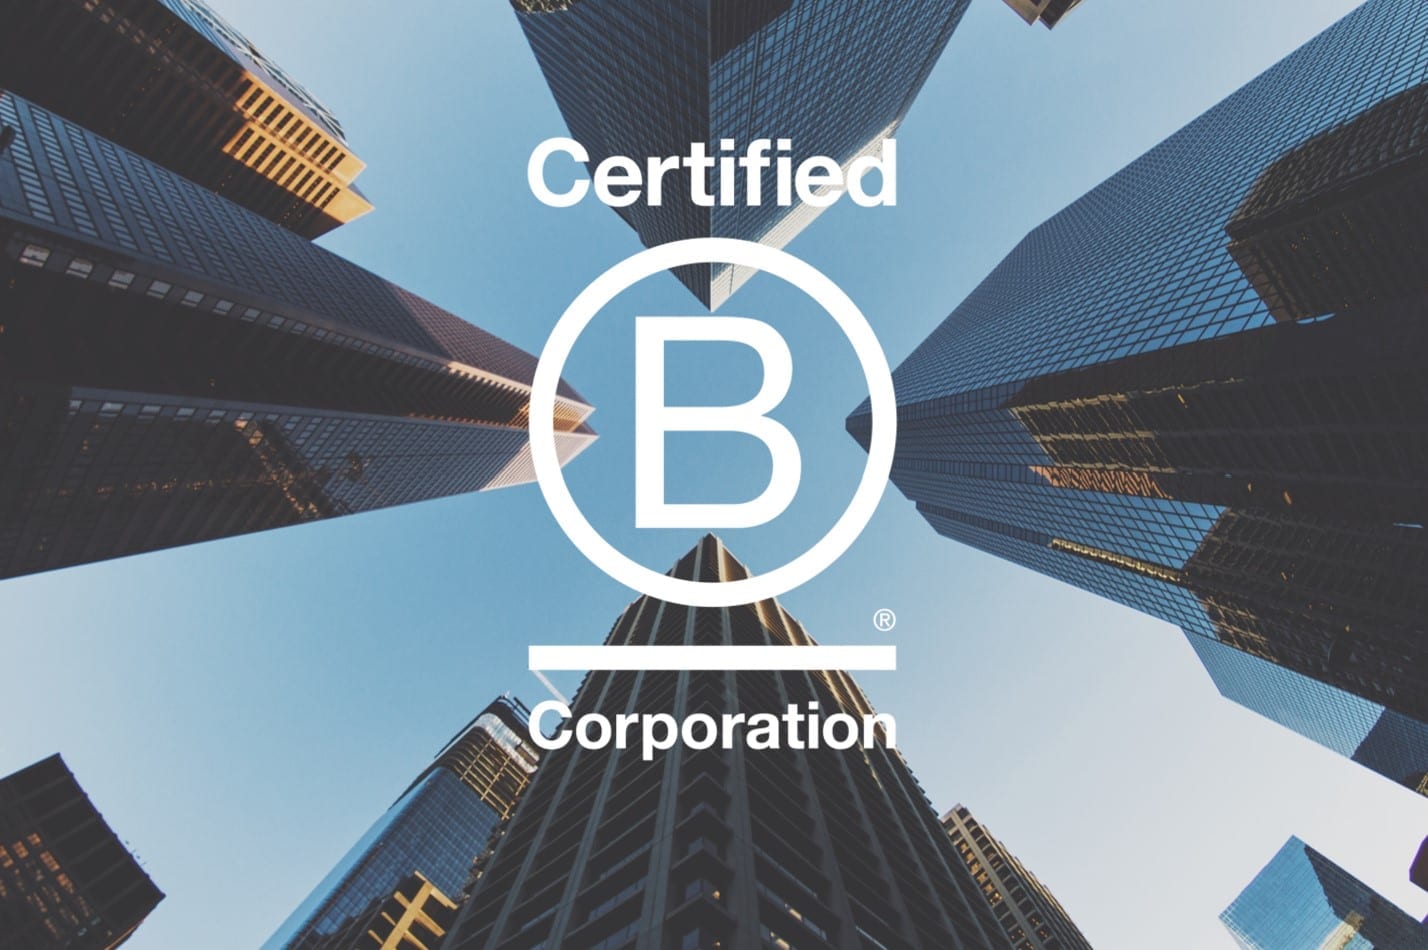 Image of B-Corp logo superimposed on skyscraper background